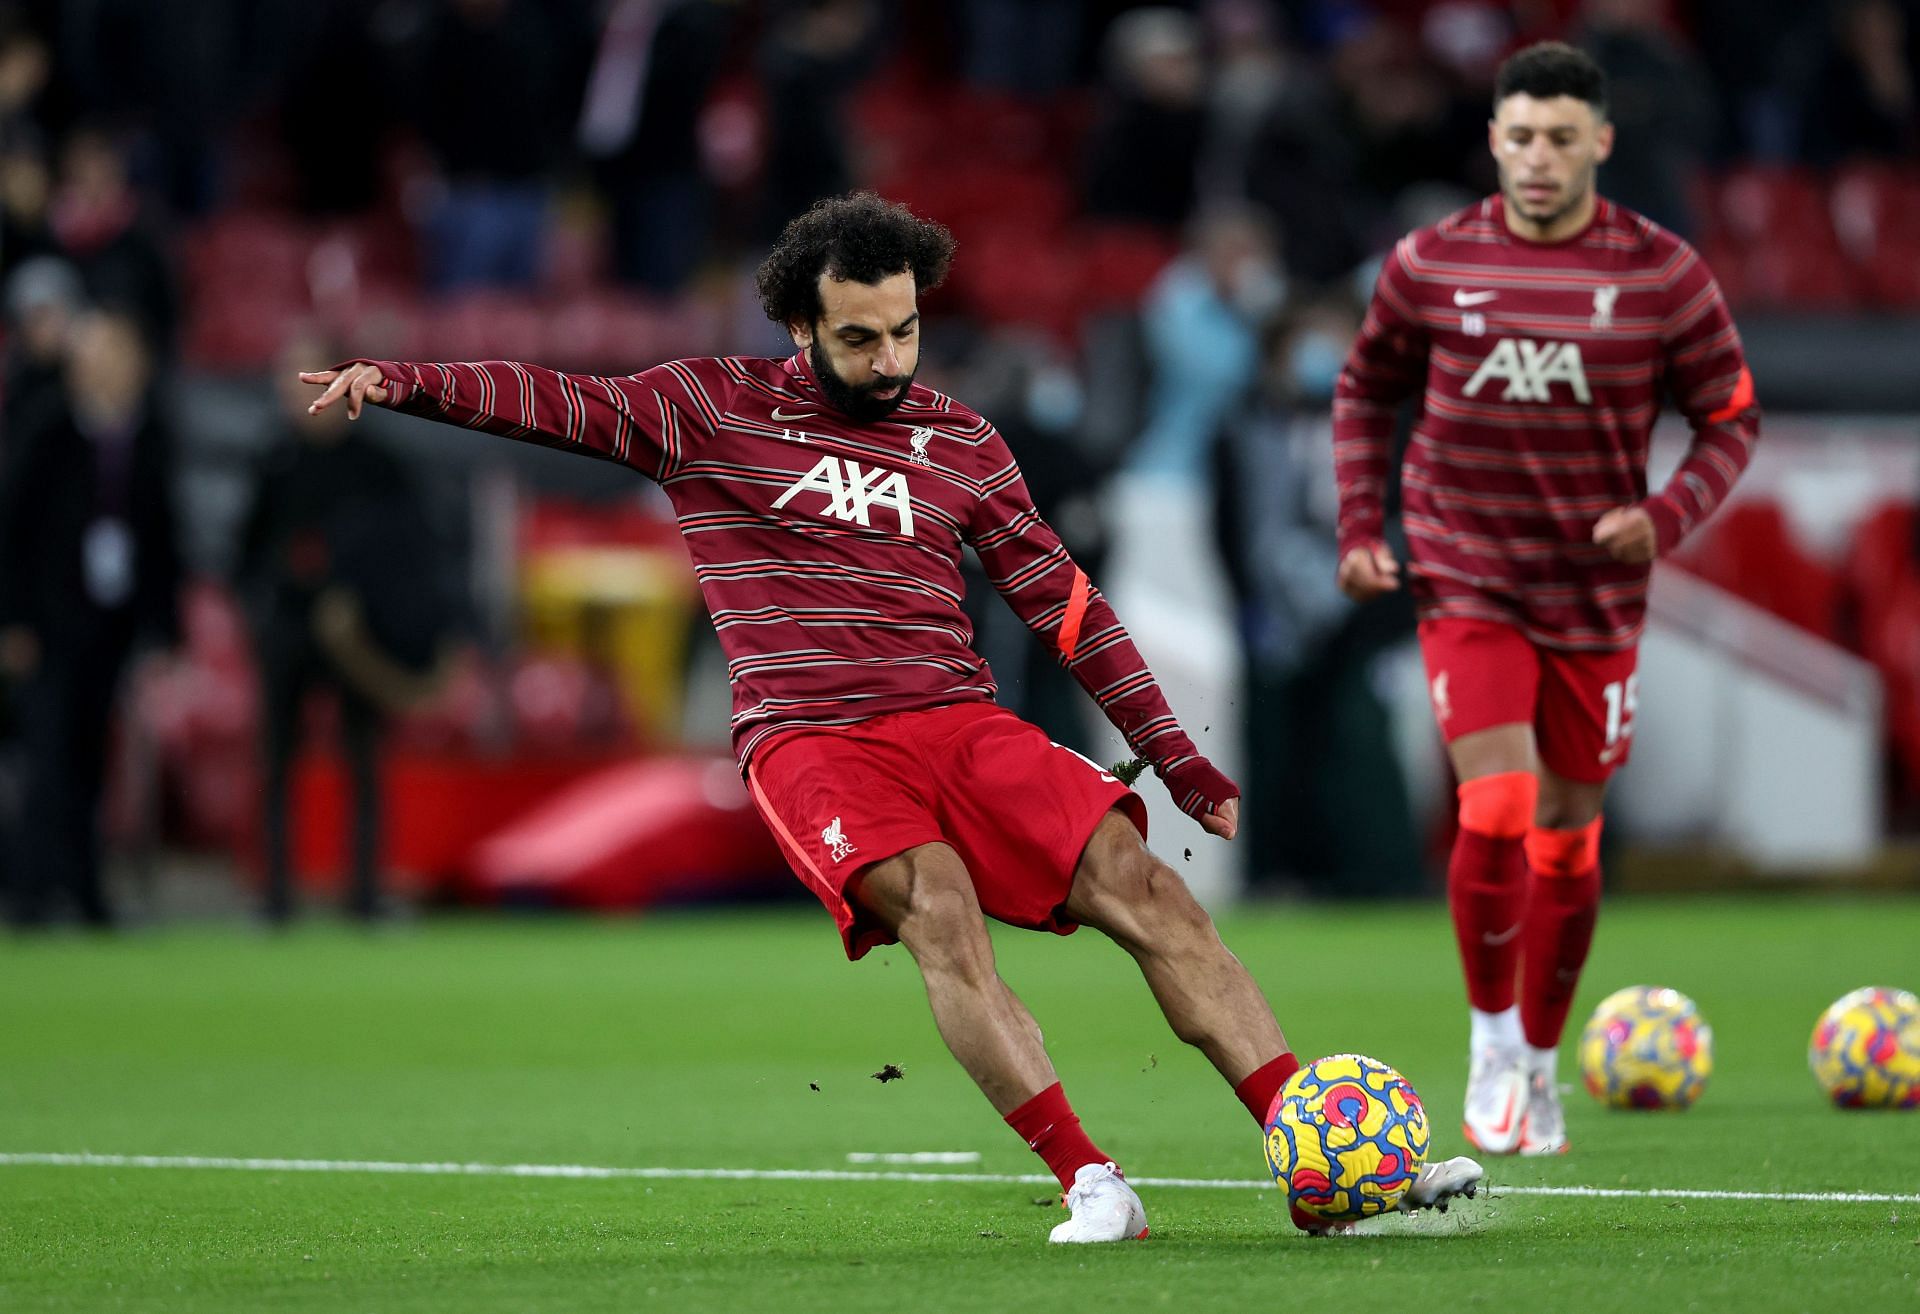 Salah is well-poised to win the Premier League Golden Boot award this season.